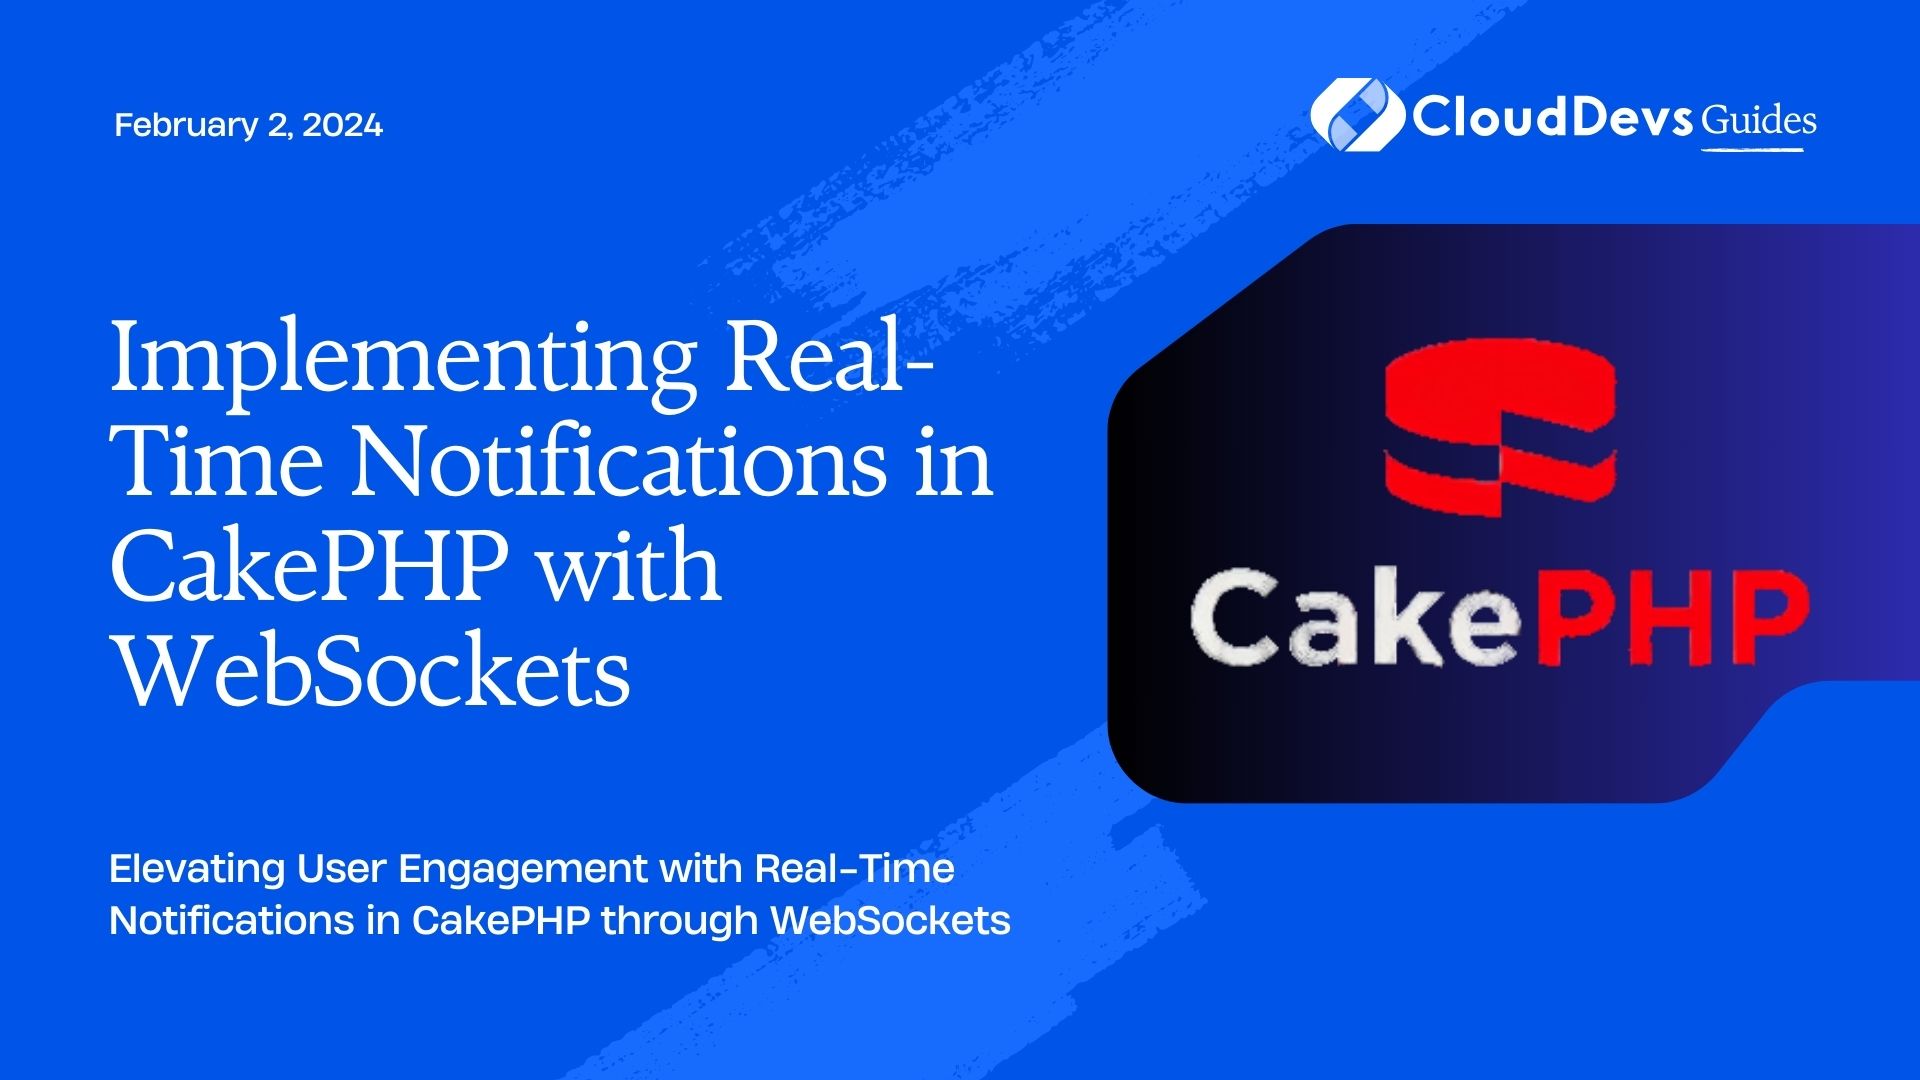 Implementing Real-Time Notifications in CakePHP with WebSockets